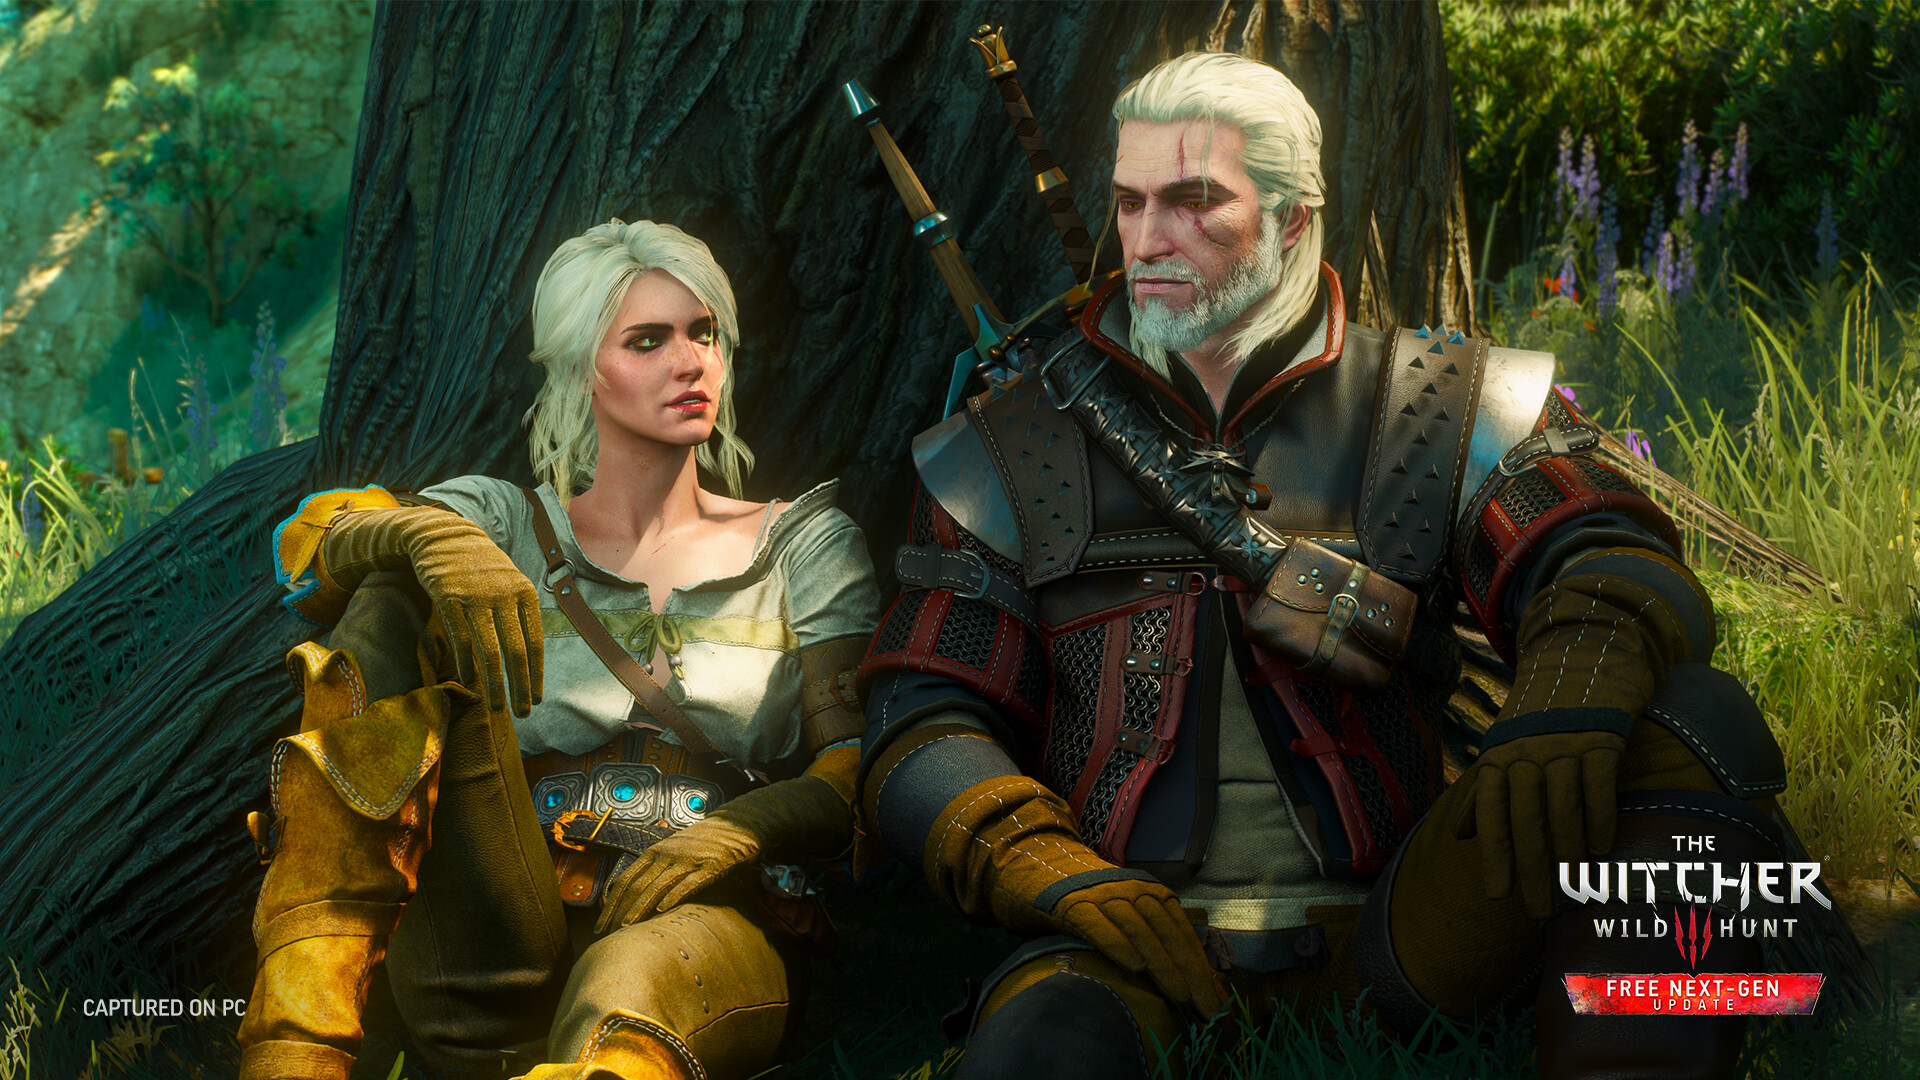 Witcher 3 On Switch Story Recap: Background And Characters To Know Before  Starting - GameSpot